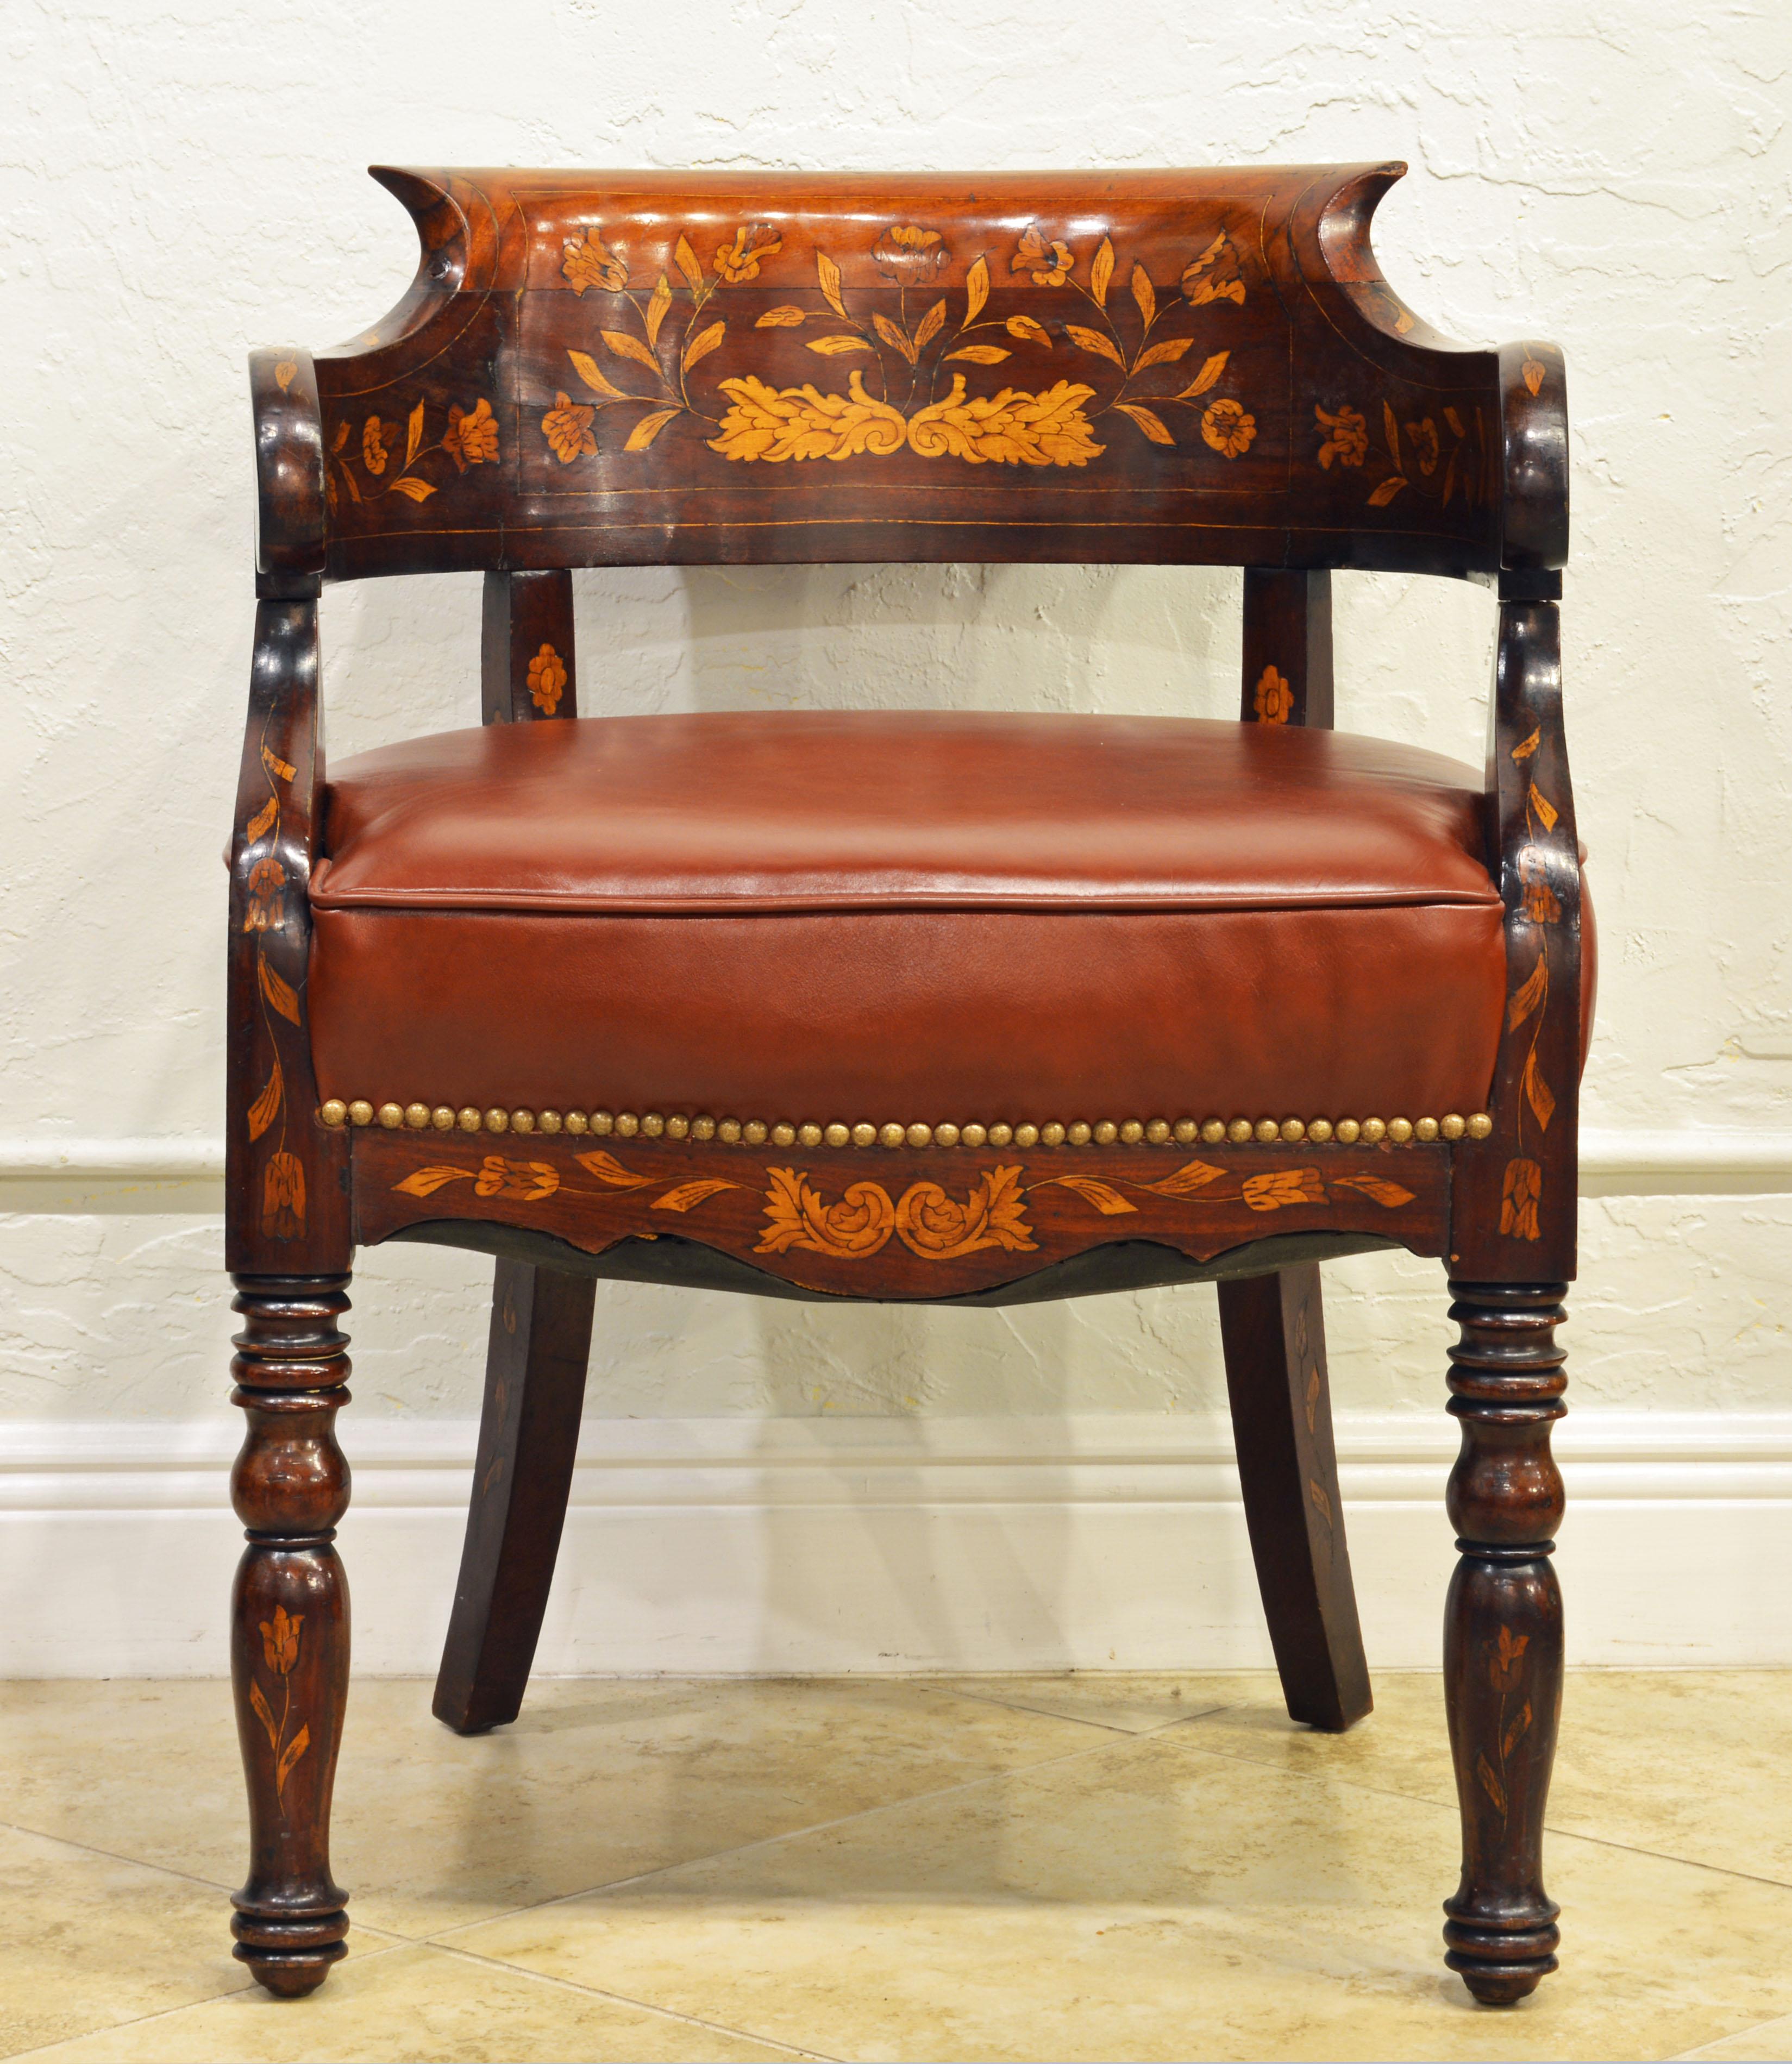 The generous detailed inlays with flowers, leaf work and even a lion head mask make this chair one of a kind. The seat is well upholstered and covered with brass nailhead trimmed glove quality leather. It is comfortable for lounging and especially